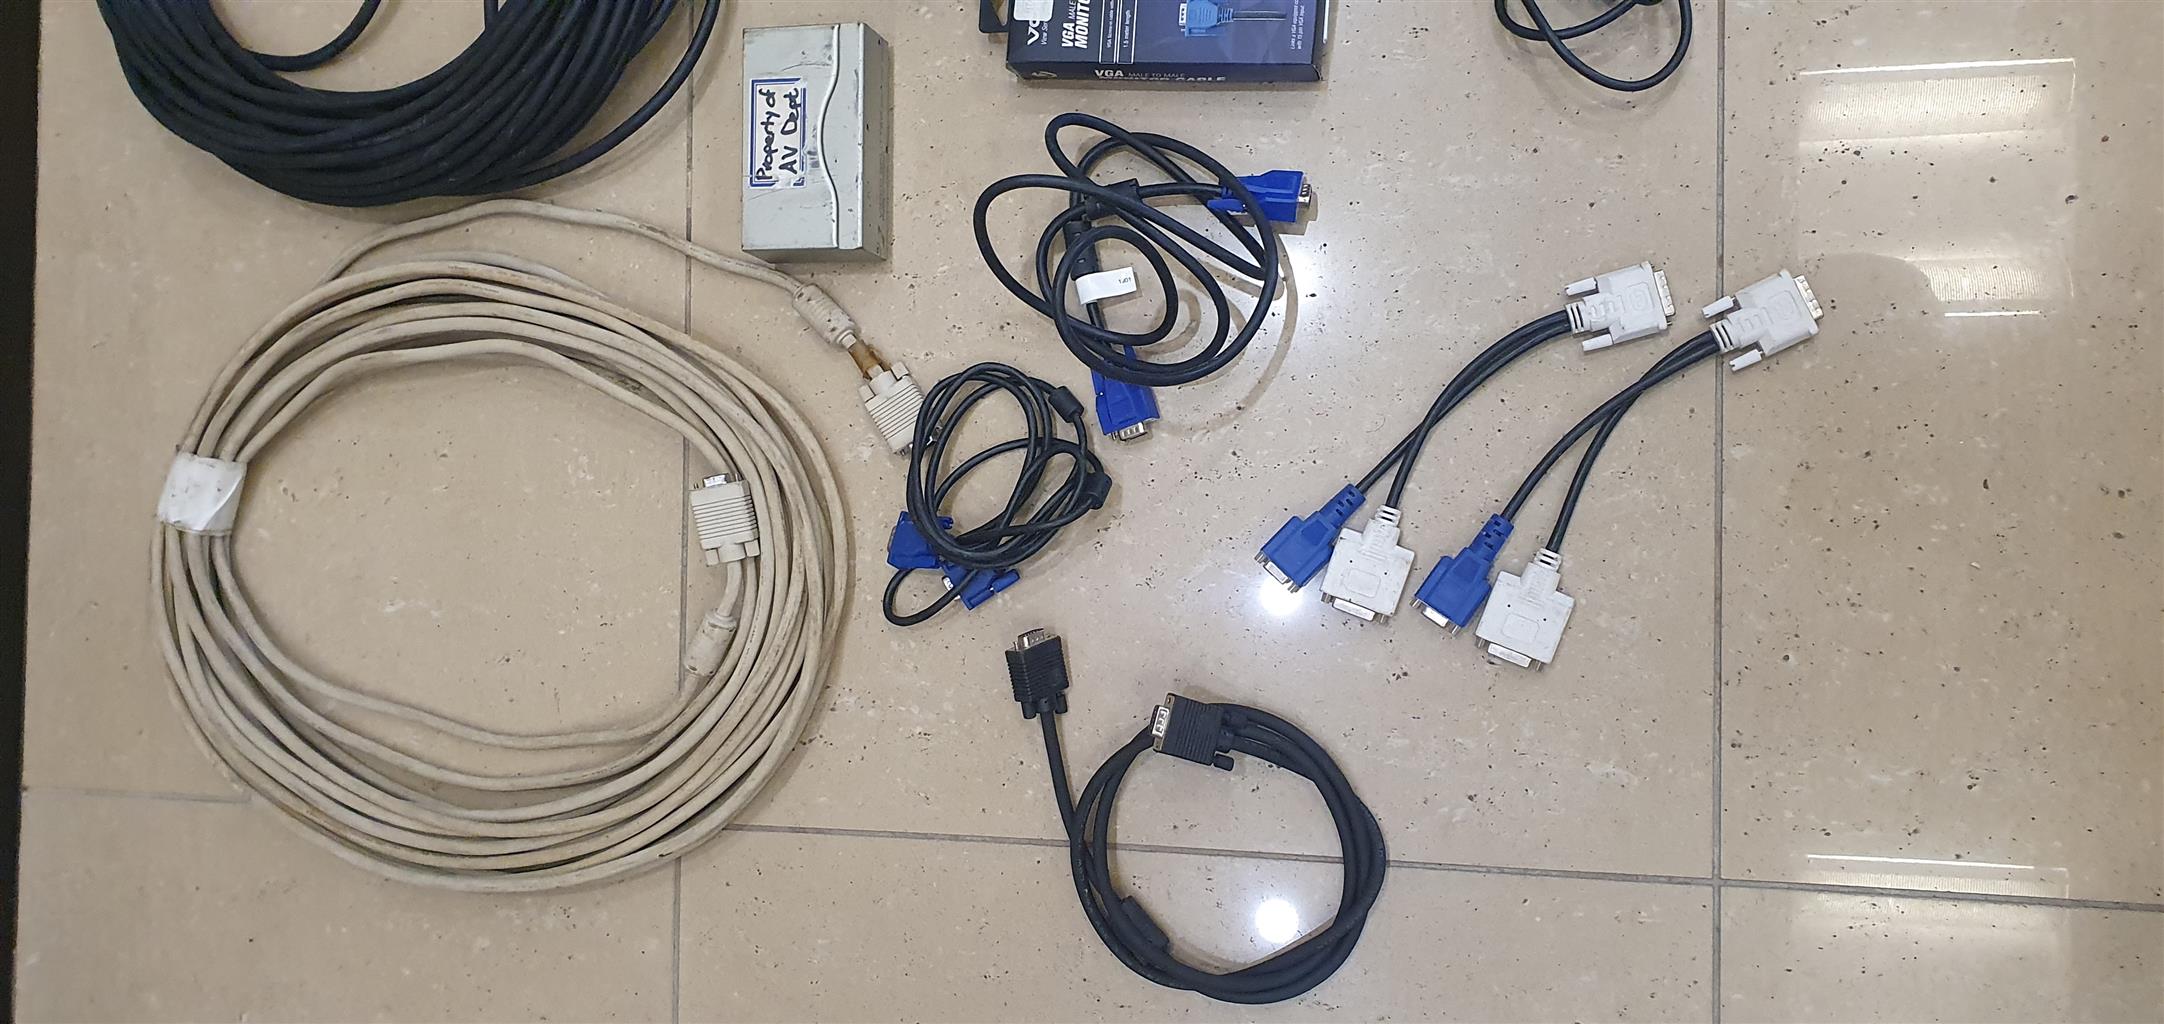 Long VGA cables plus 30m USB extension and other computer cables